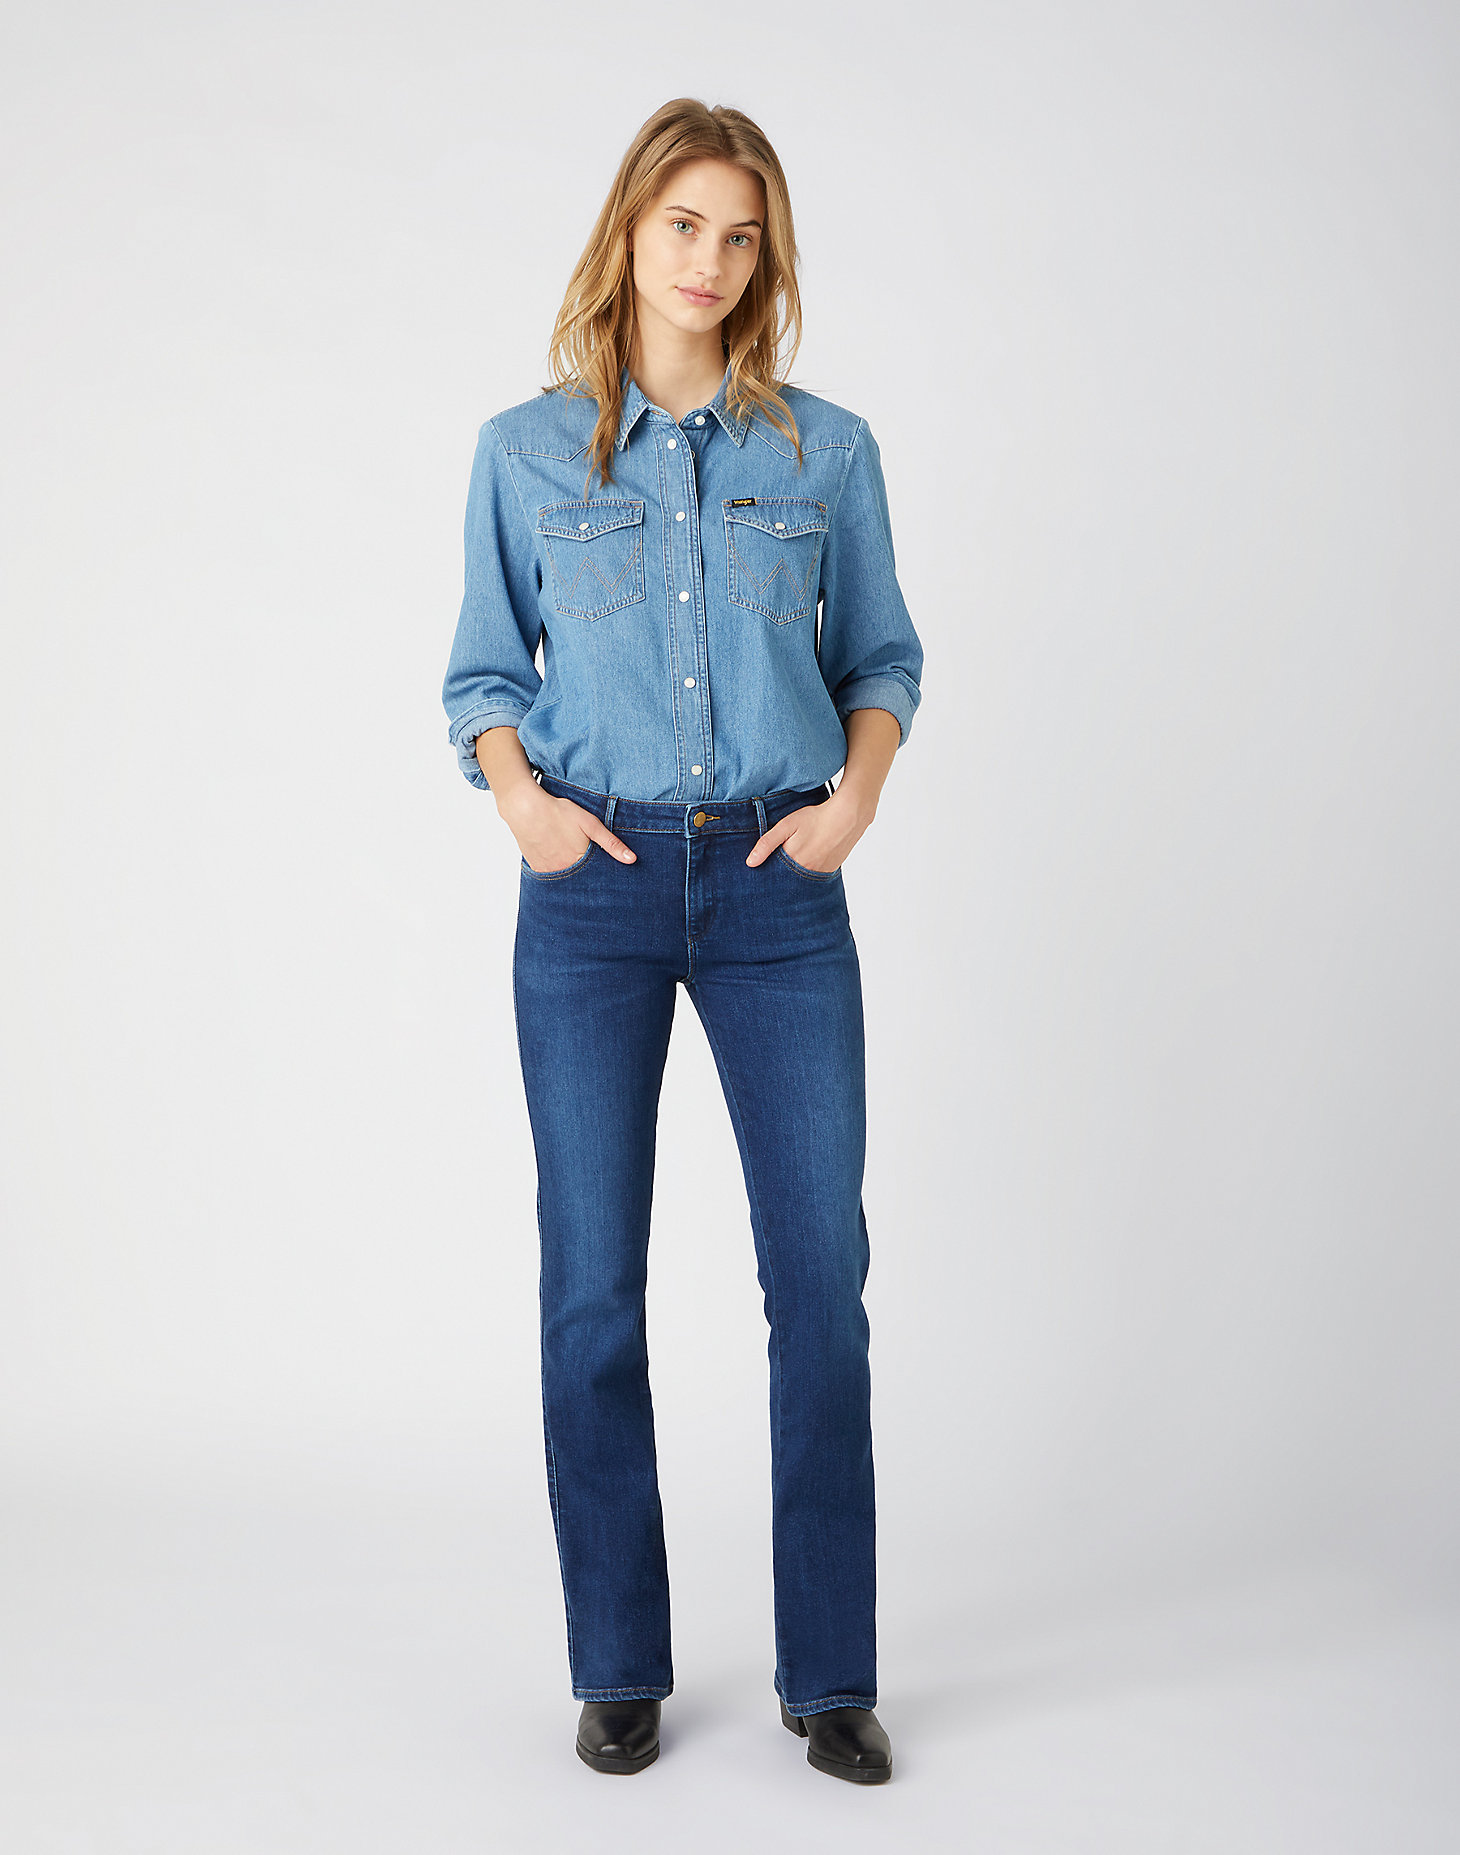 Bootcut Jeans in Authentic Love alternative view 1